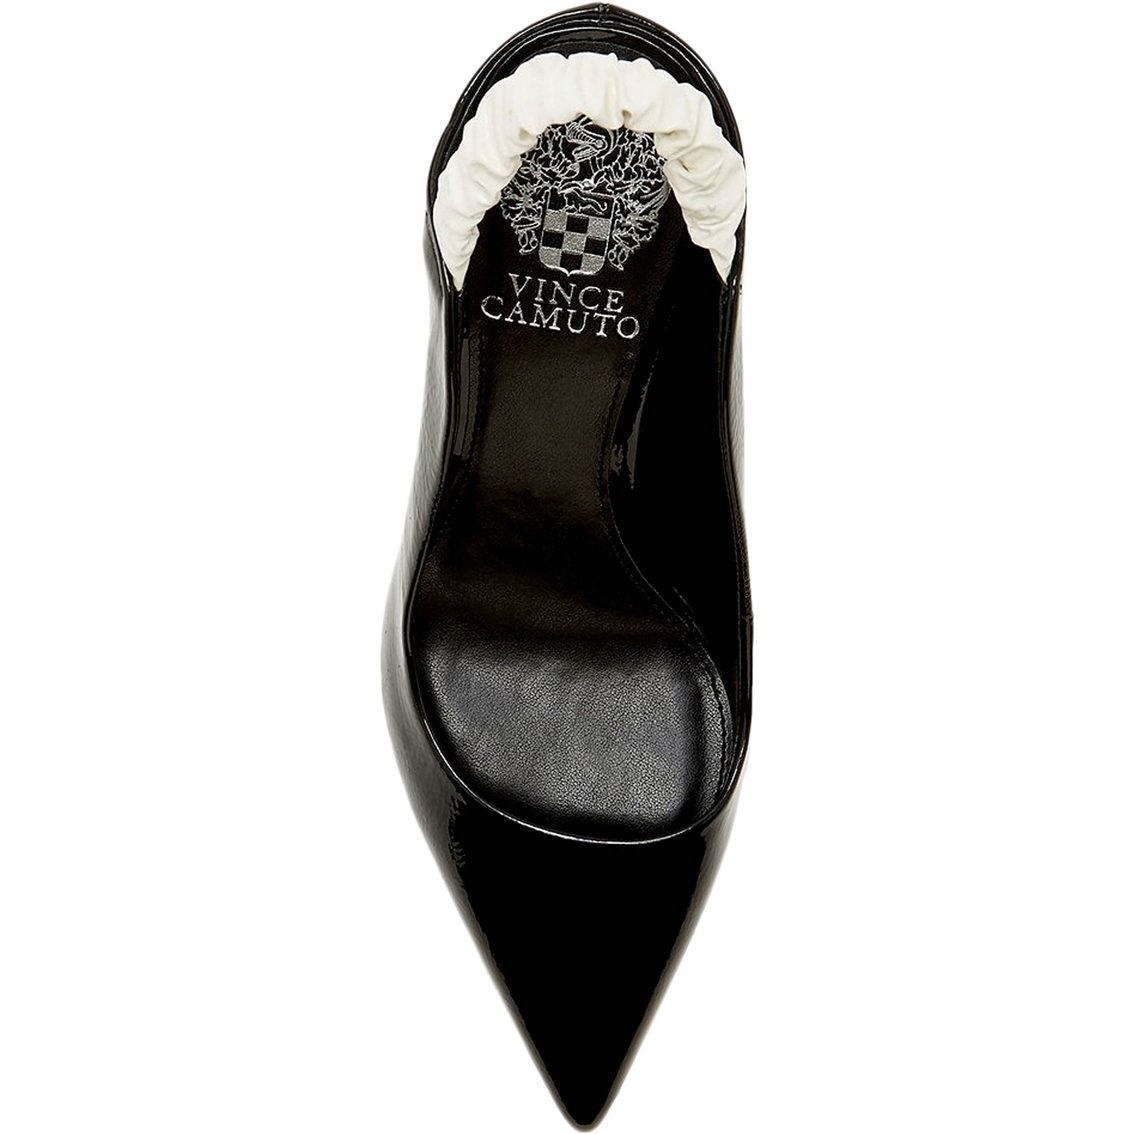 Vince Camuto Restia Pumps - Image 4 of 8